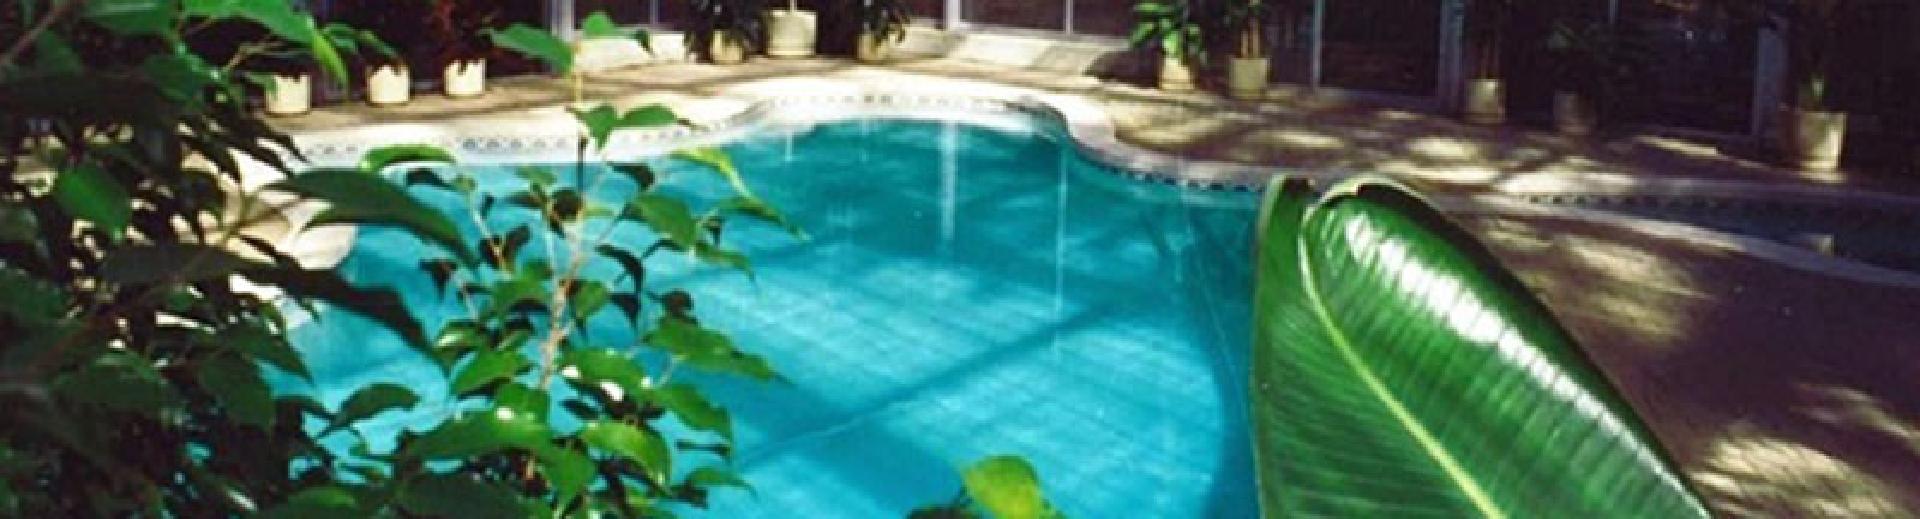 Product Glass Pool Enclosures image